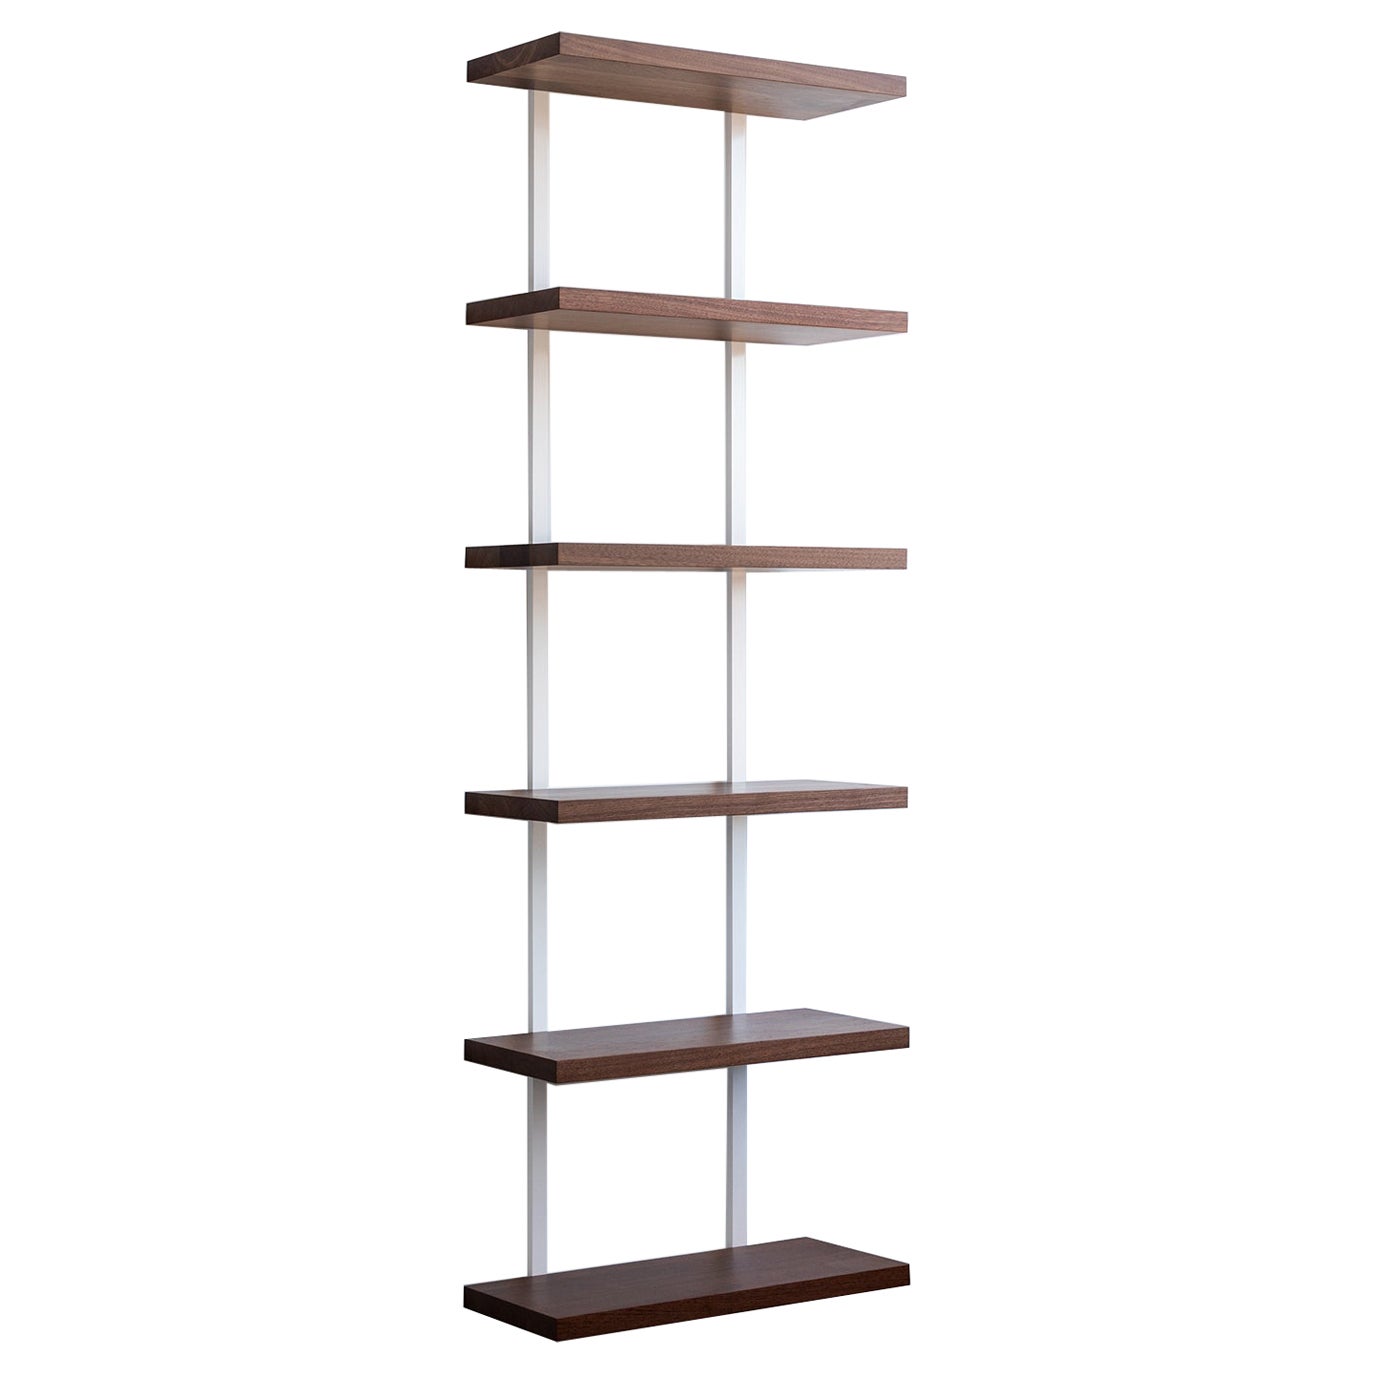 AS6 wall unit 24" wide shelves in solid walnut and powder coated steel